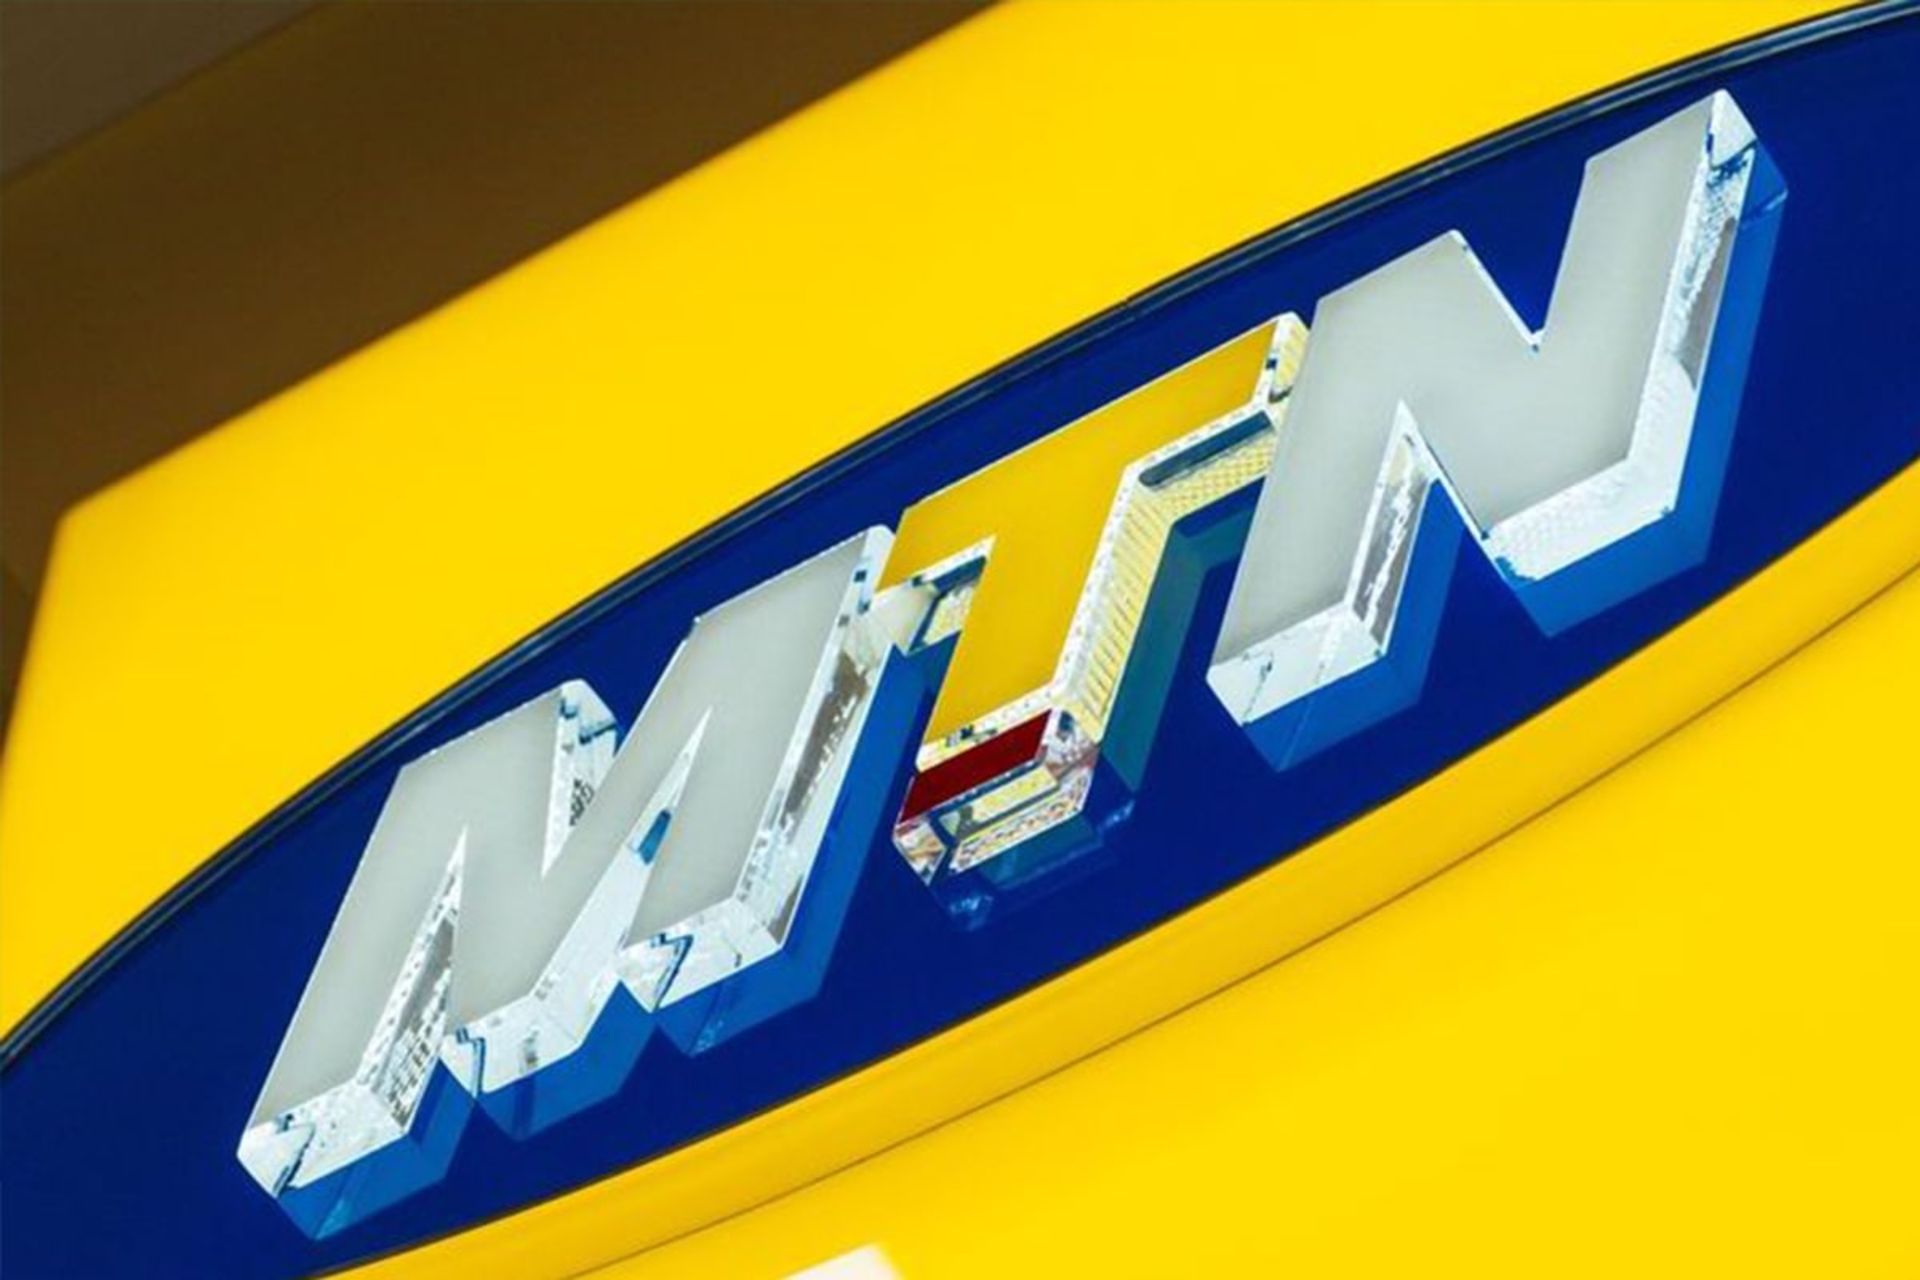 mtn_group_south_africa_operator_sign